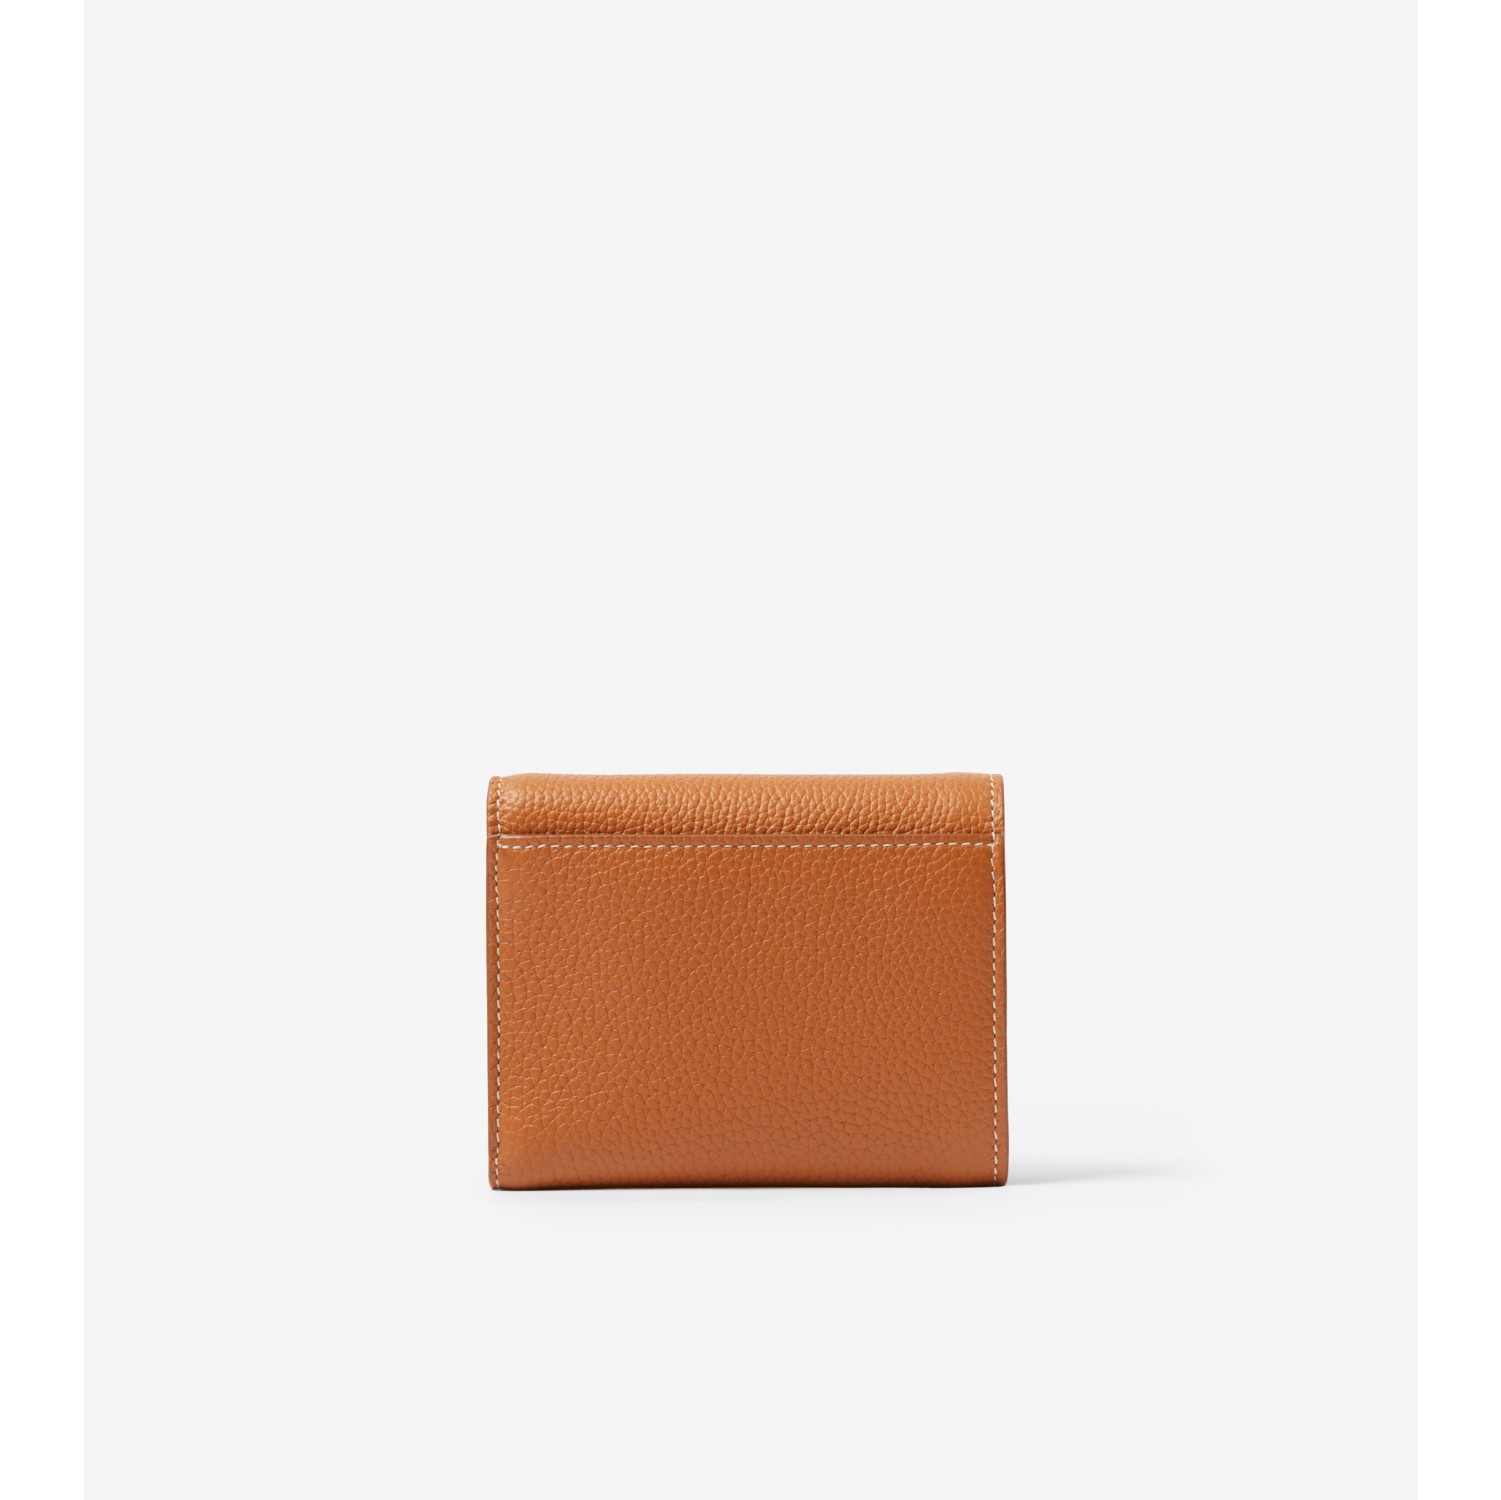 Burberry Business Grain Leather Card Holder